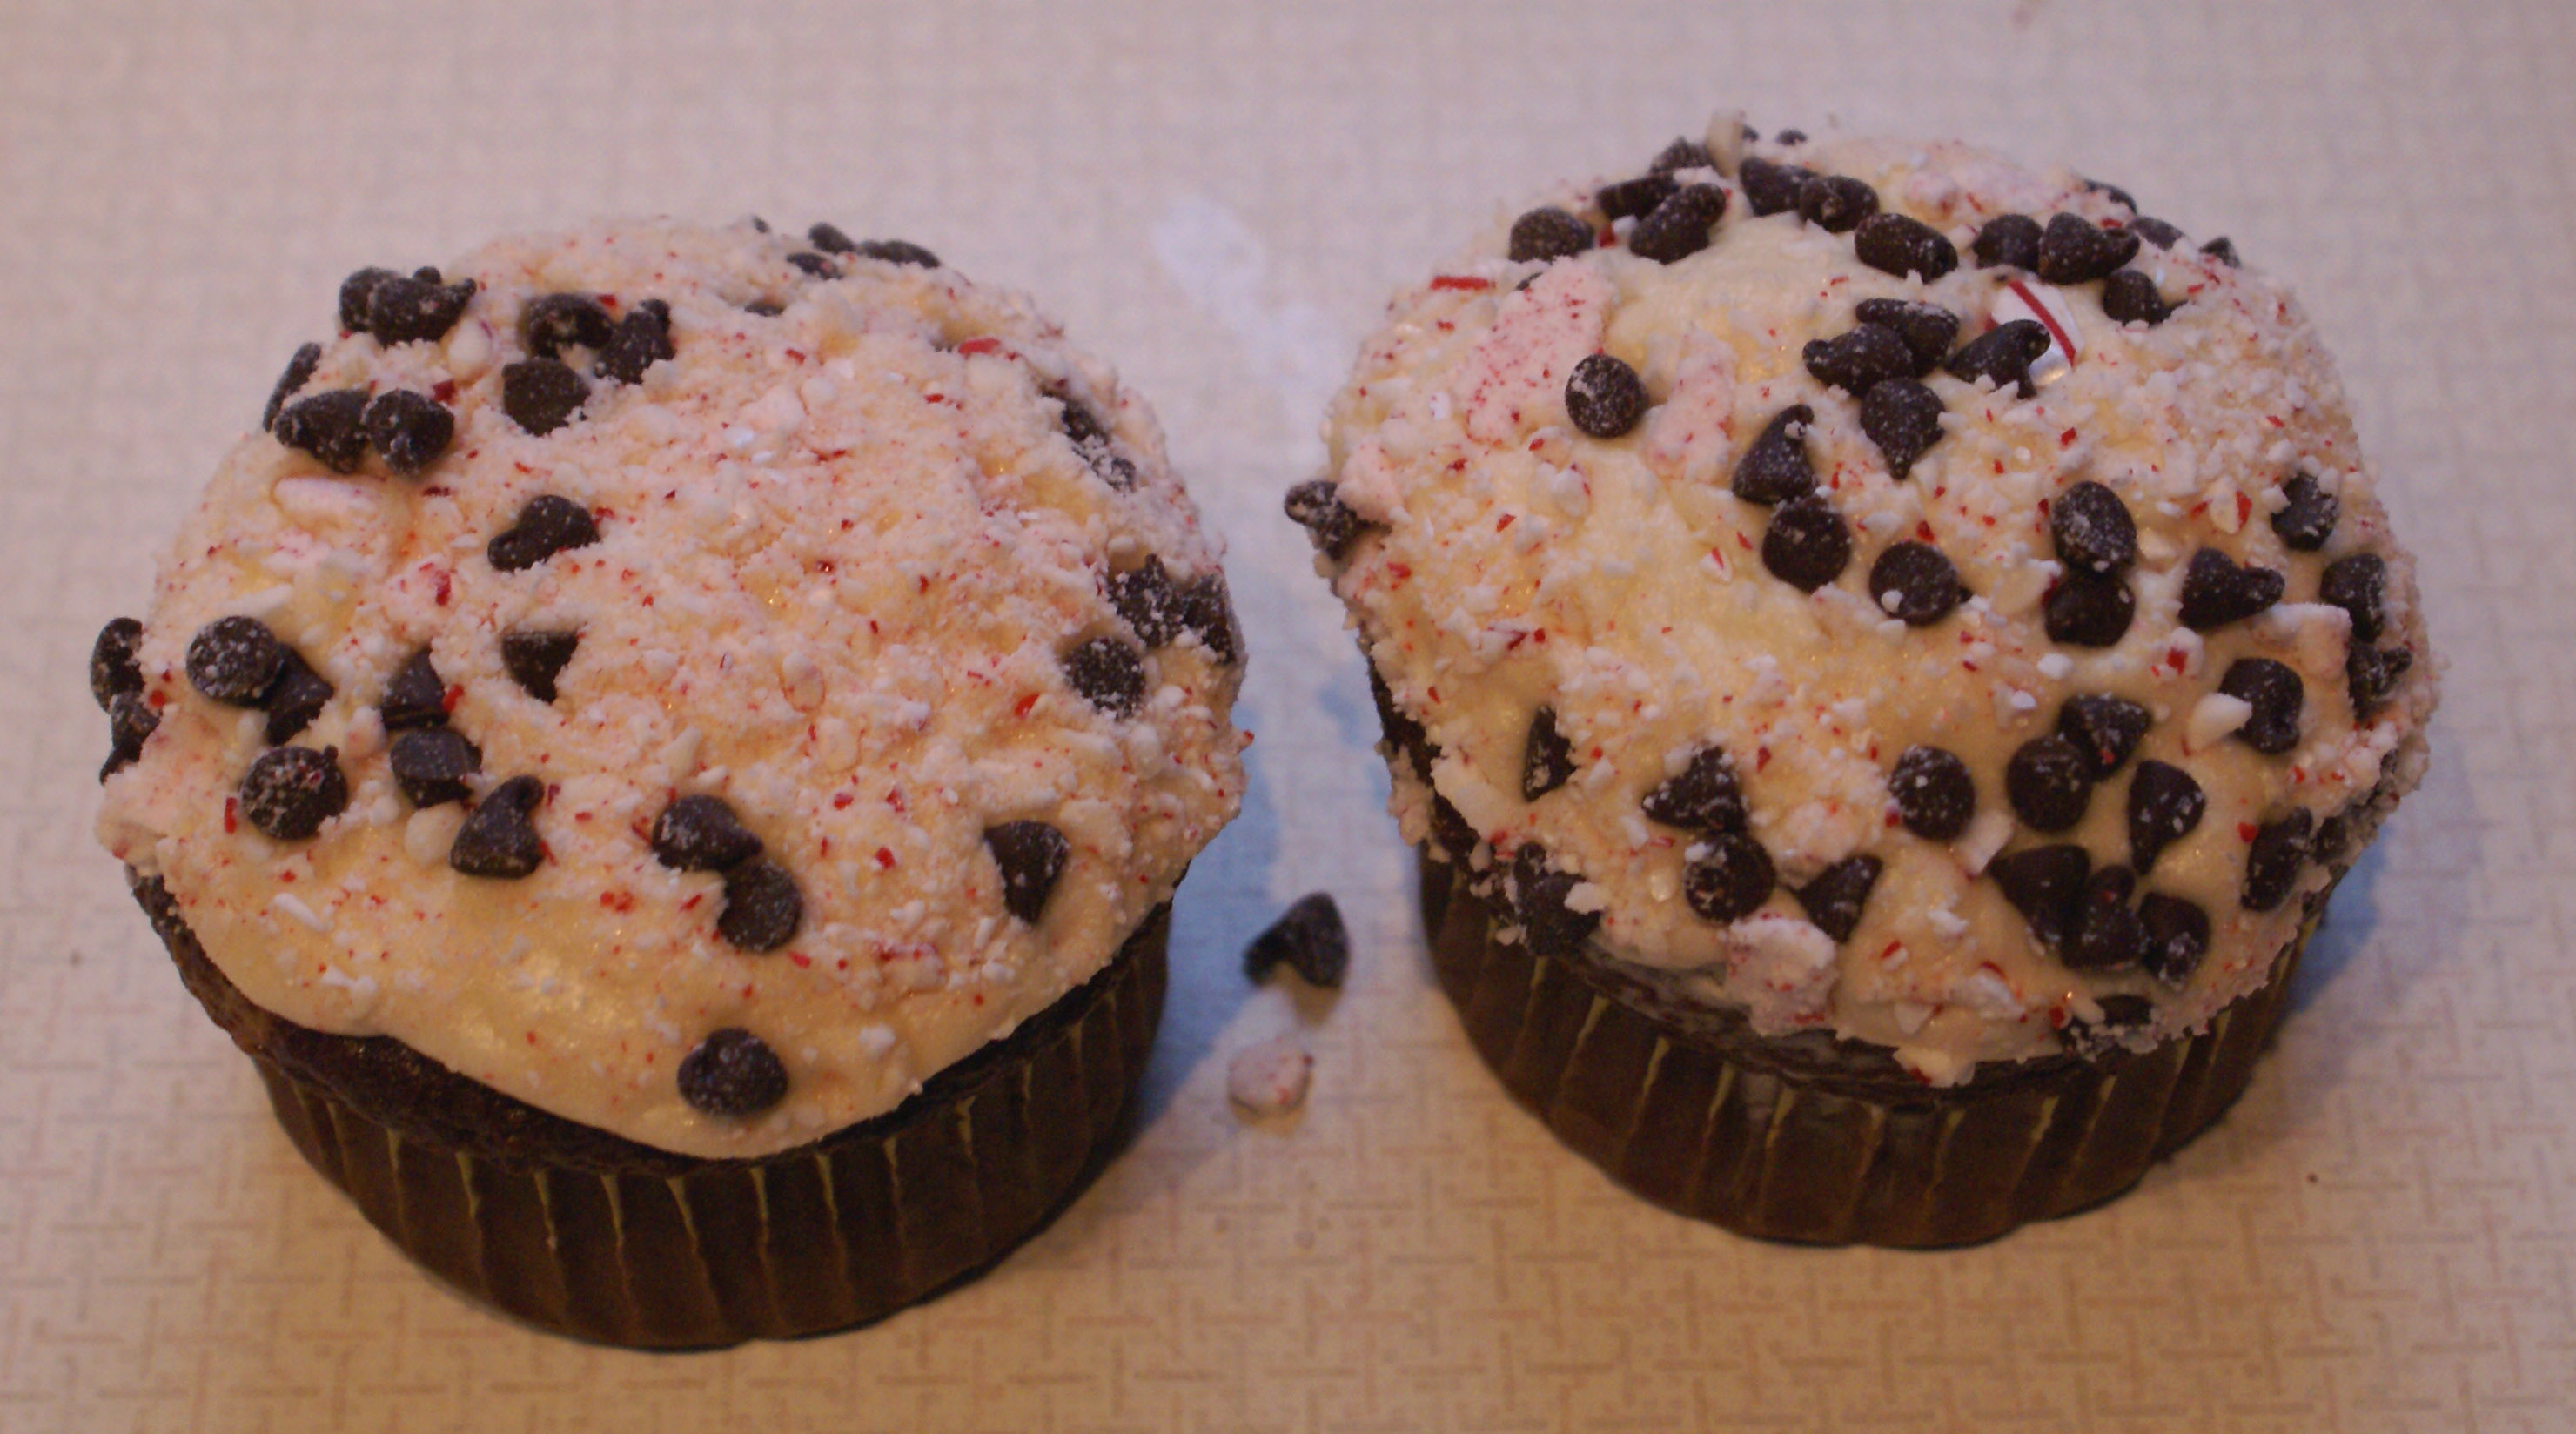 Chocolate mint cupcakes, with vanilla icing, topped with crushed Lehman's Old-Fashioned Sugar Stick Candy in Peppermint.